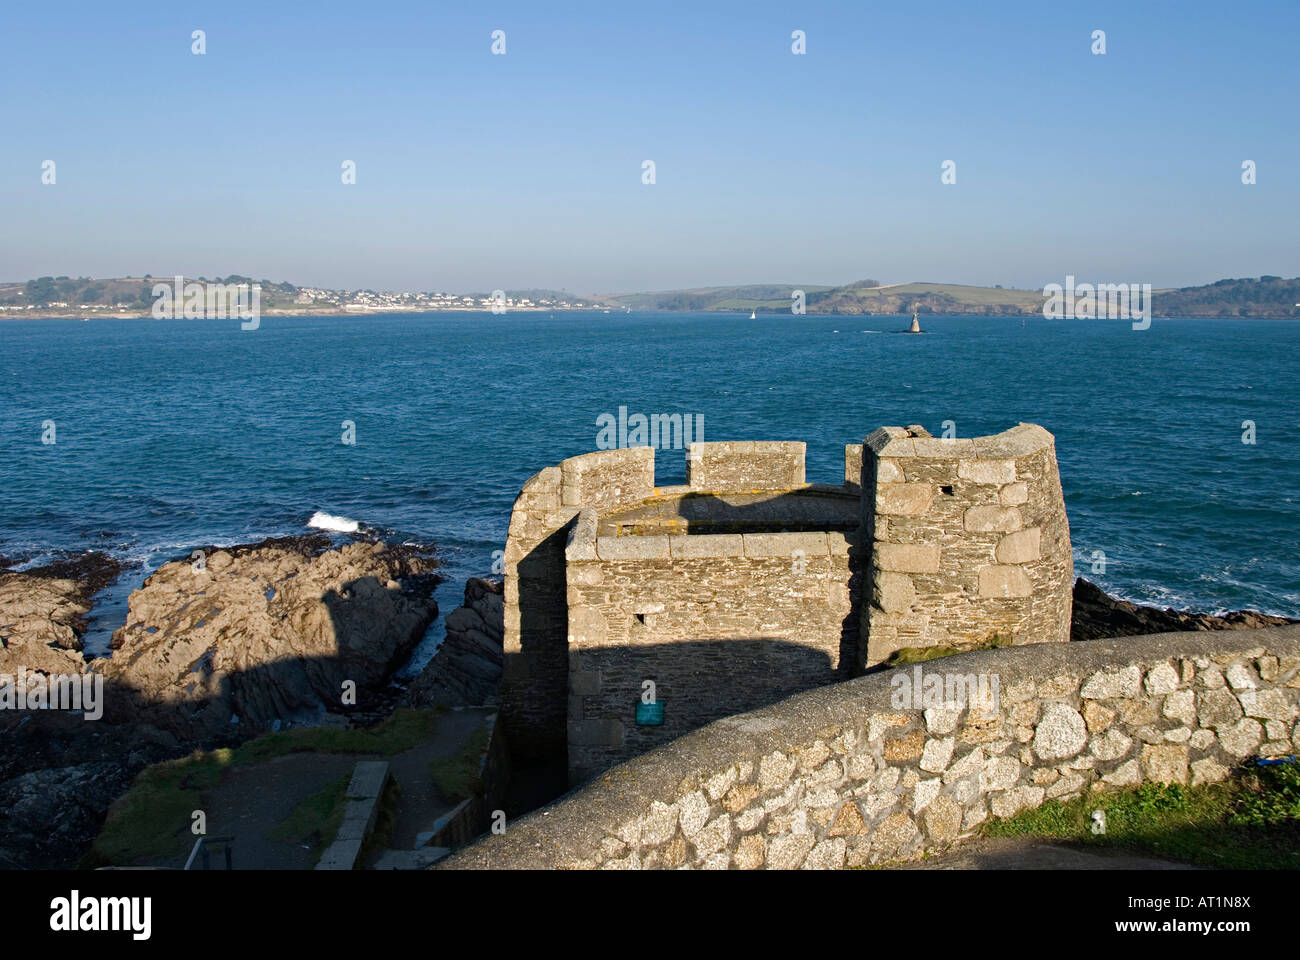 Falmouth, Cornwall, UK. Fortifications below Pendennis Castle, overlooking the entrance to Falmouth harbour (Carrick Roads) Stock Photo